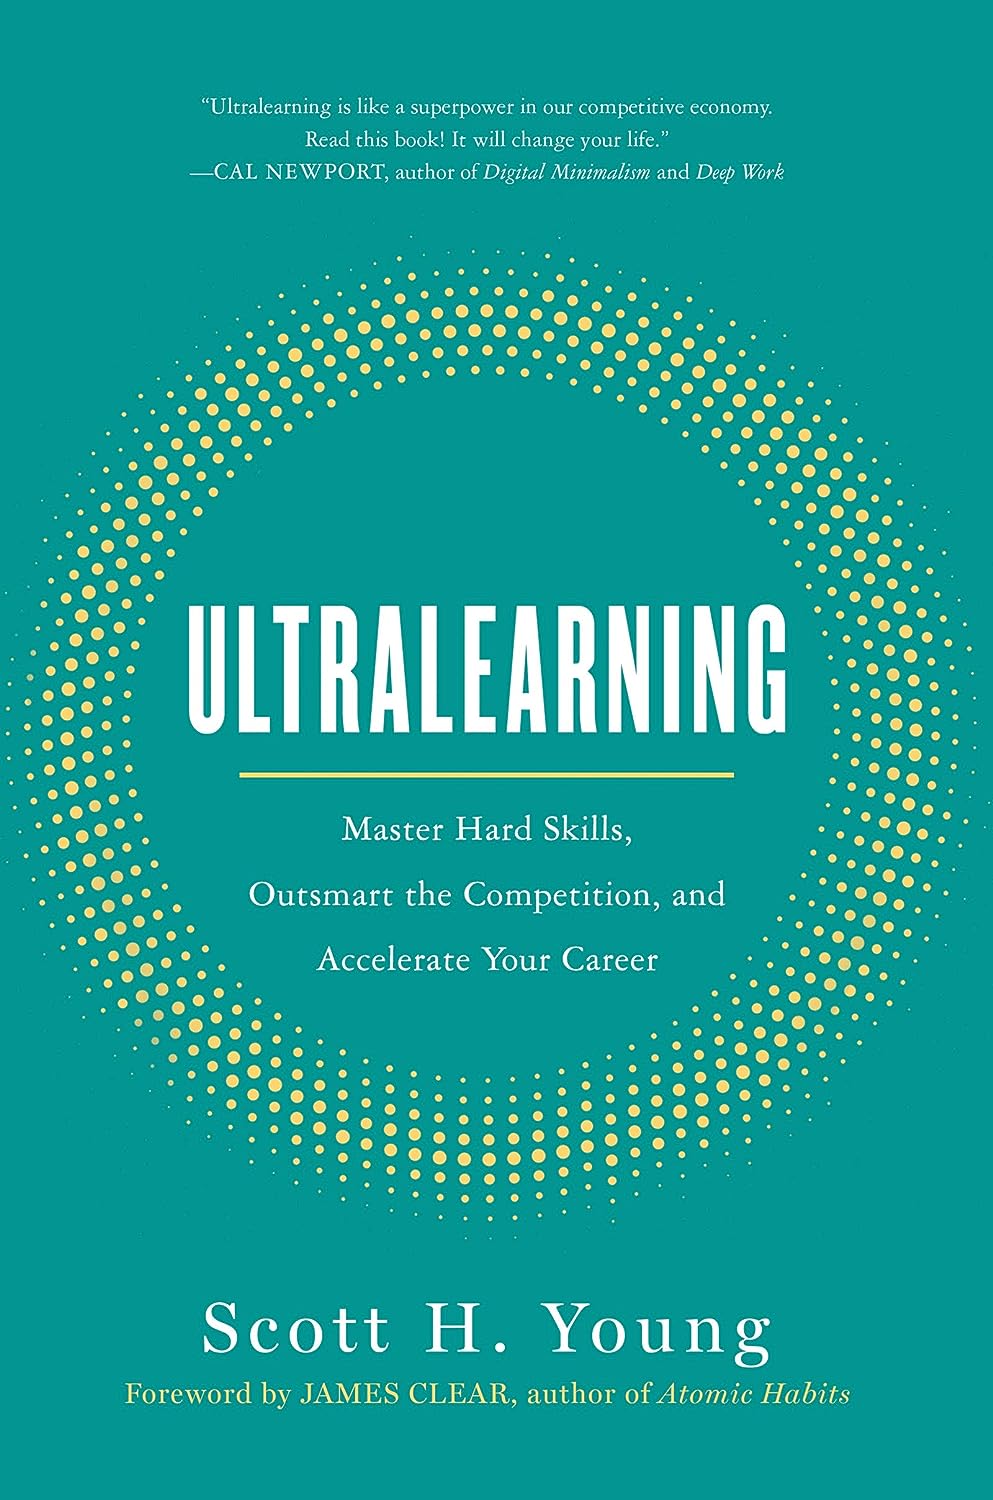 Scott Young, James Clear: Ultralearning (Hardcover, 2019, Harper Business)